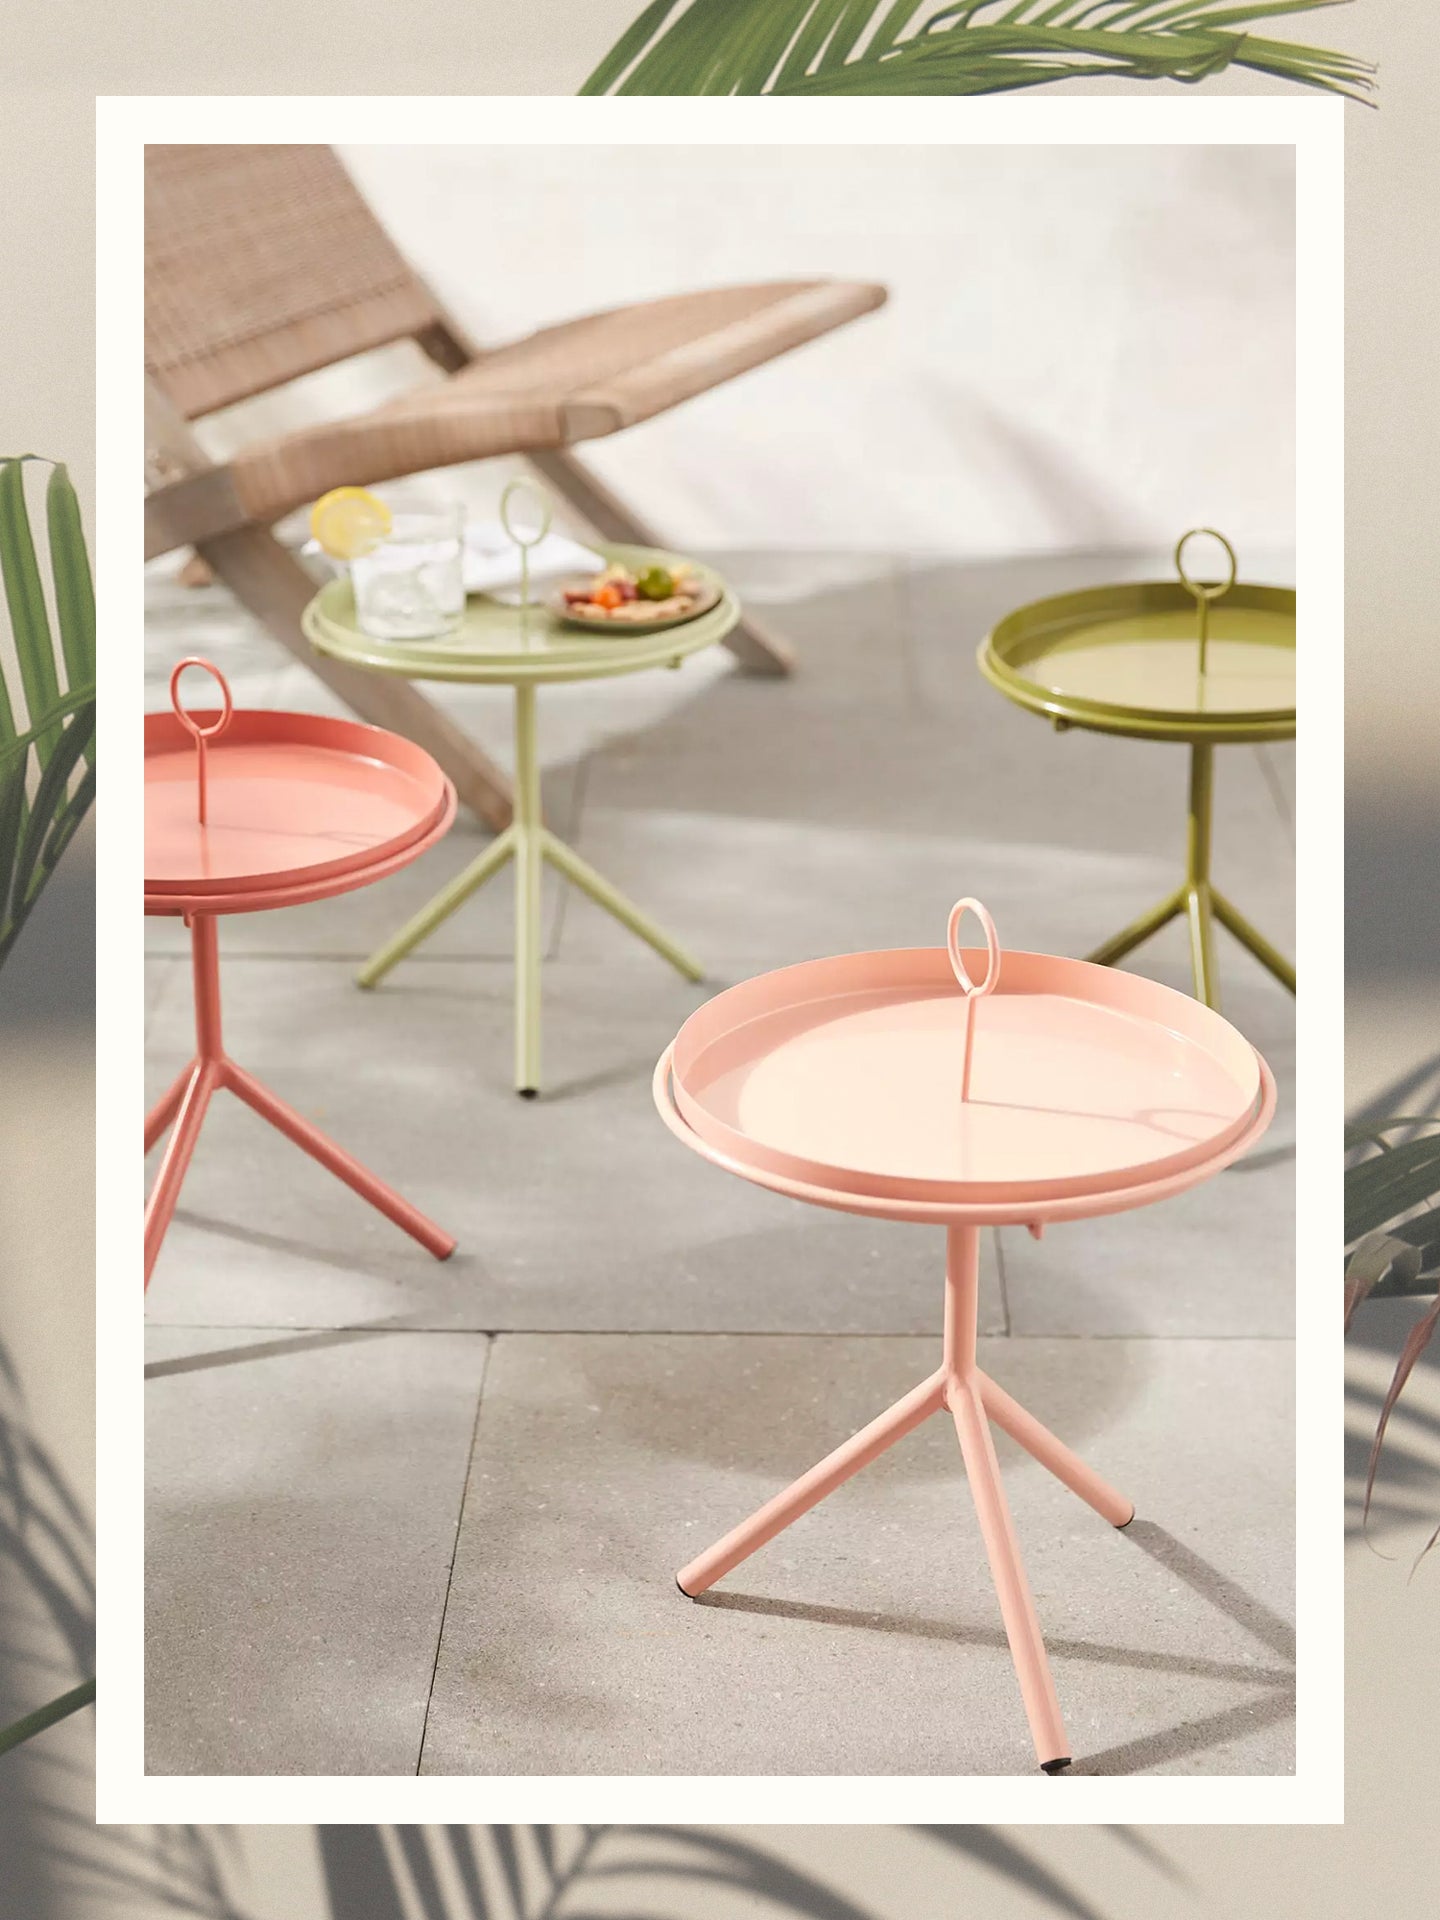 Outdoor side tables in powder-coated metal from Anthropologie.